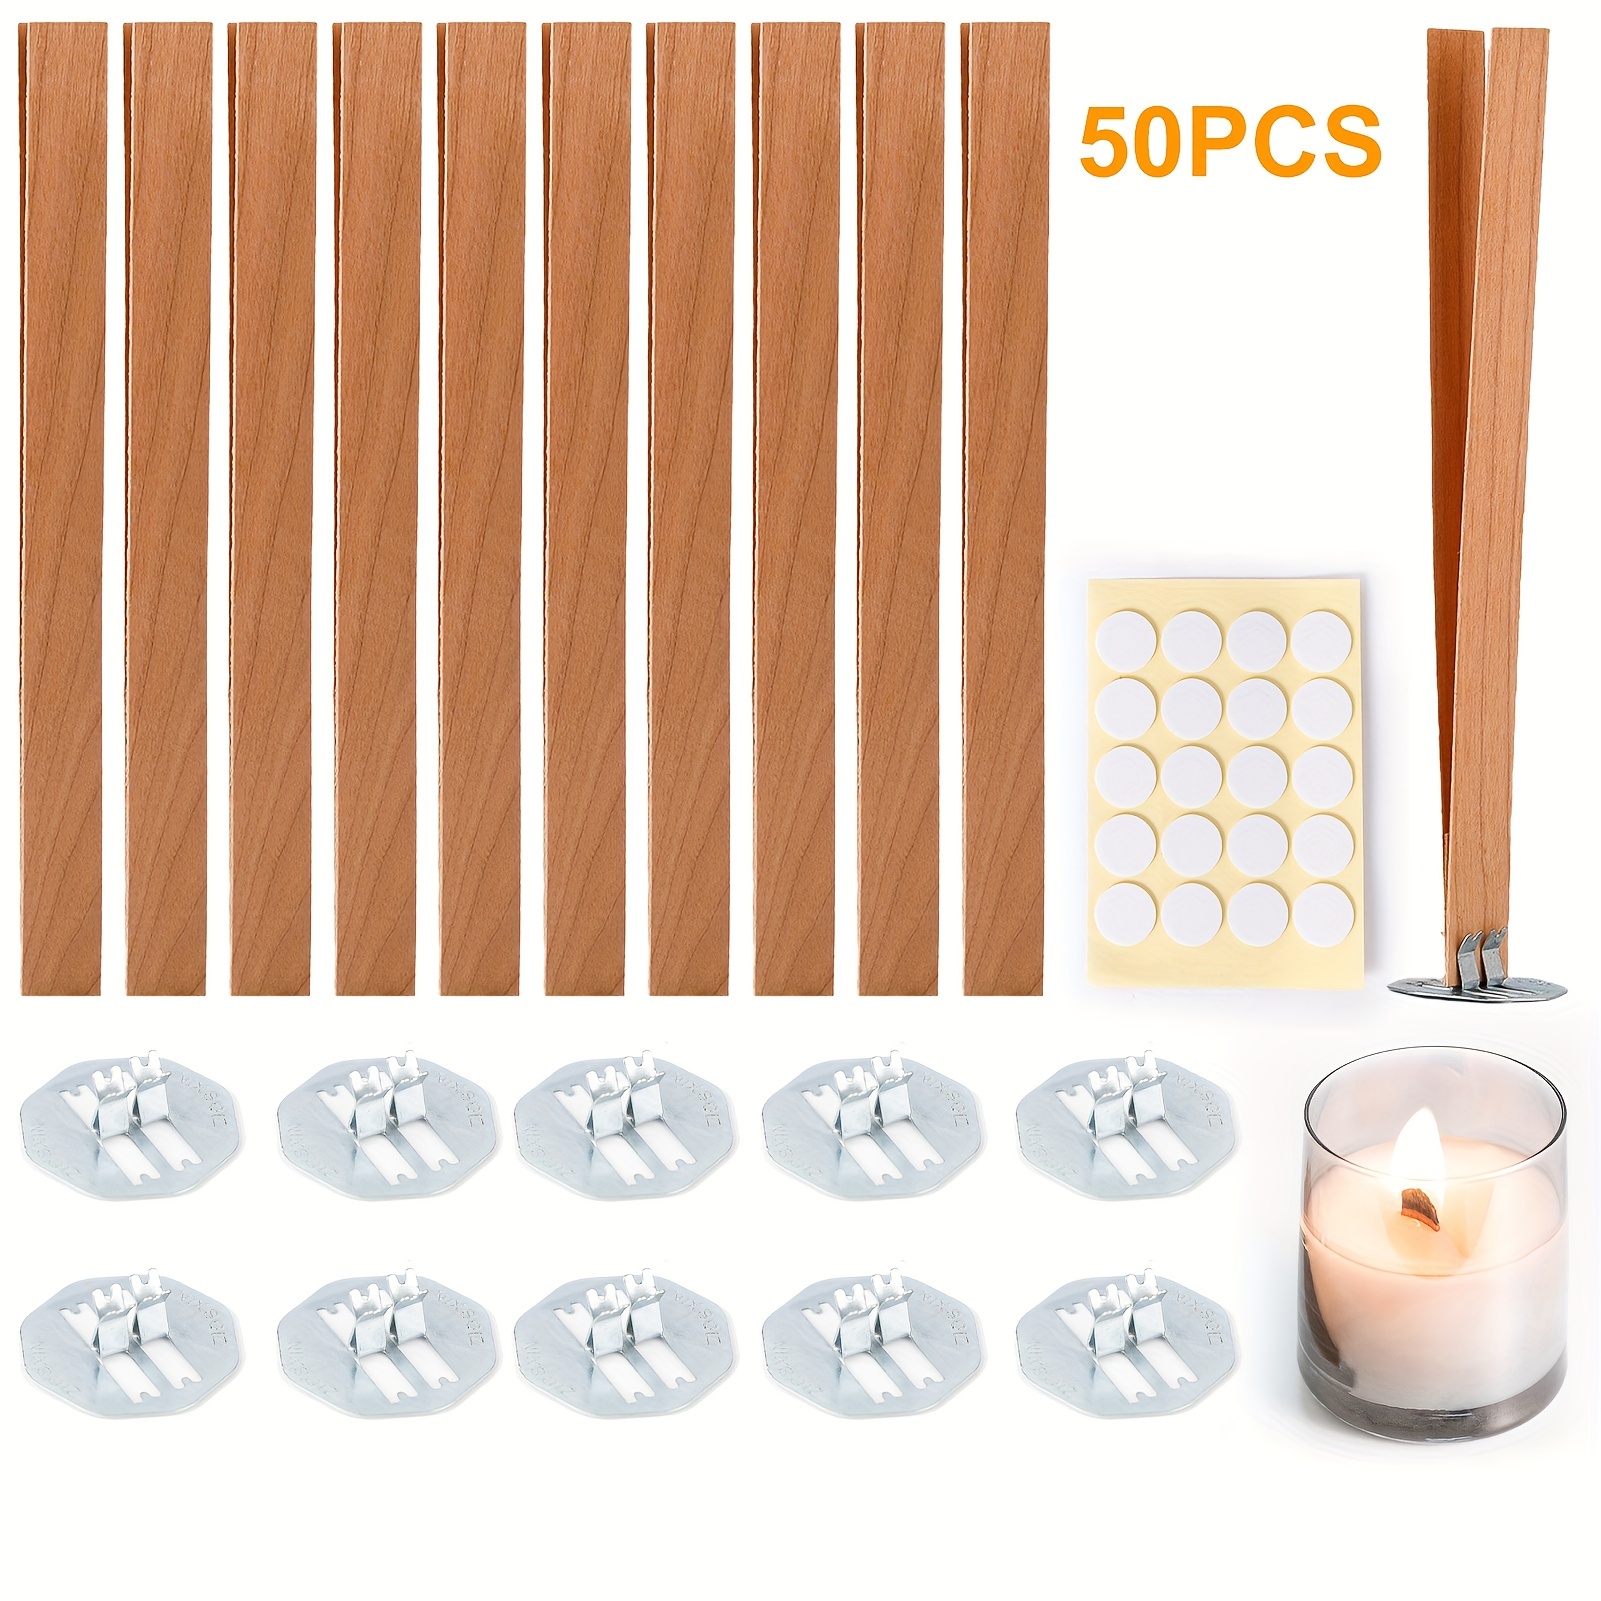 Smokeless Wooden Candle Wicks, Handcraft DIY Degradable Simple Operation Wood  Candle Wicks 33 Pcs For Candle Making Craft 